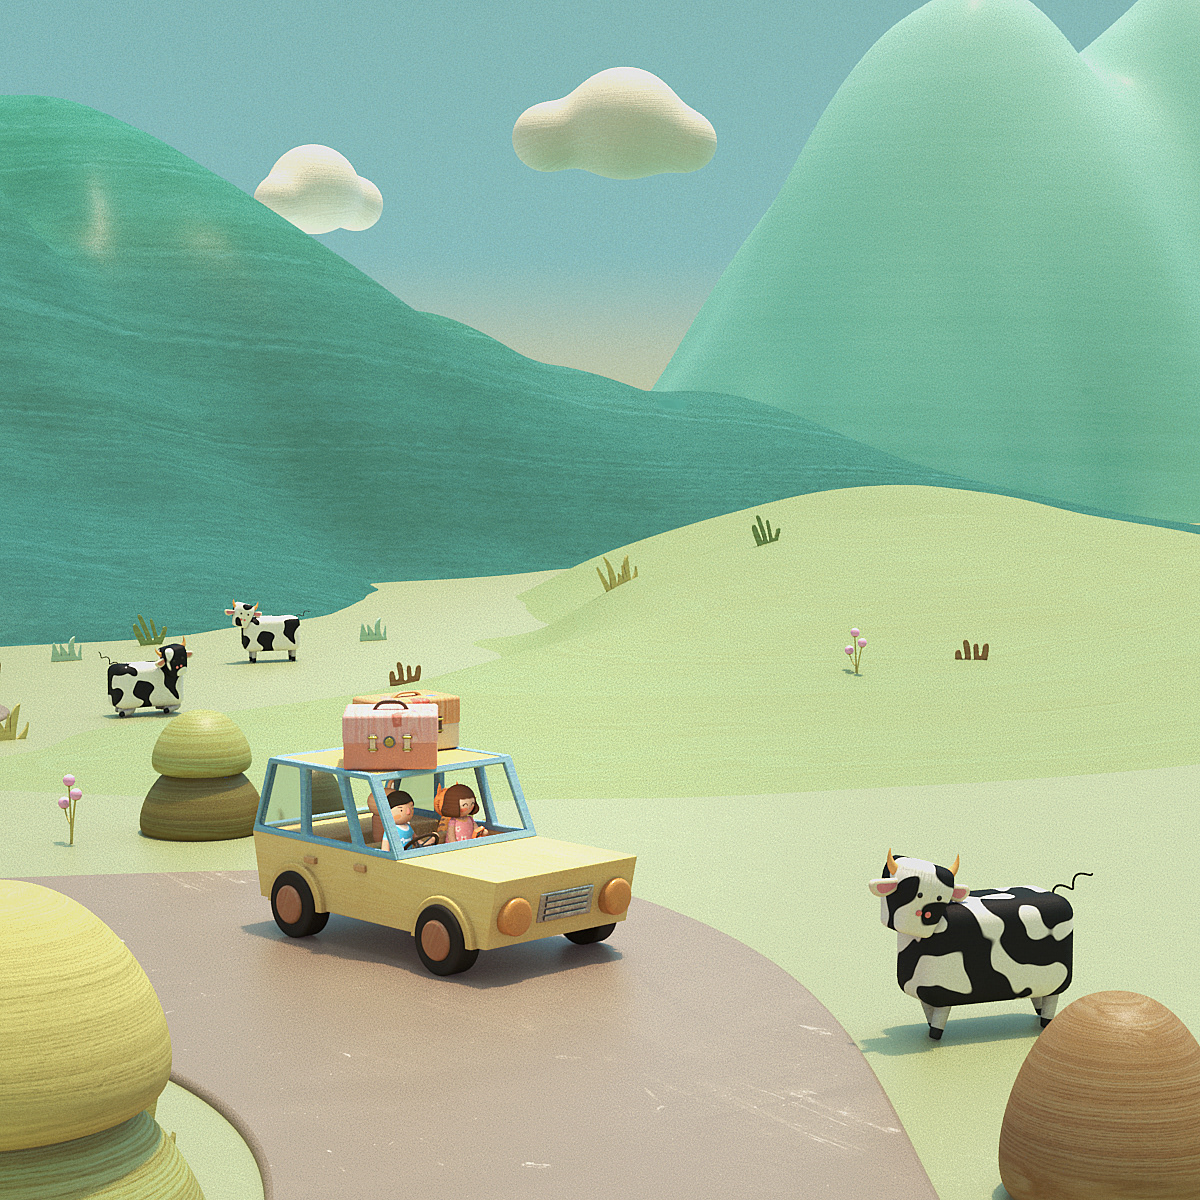 Road Trip - 3D Animation on Behance